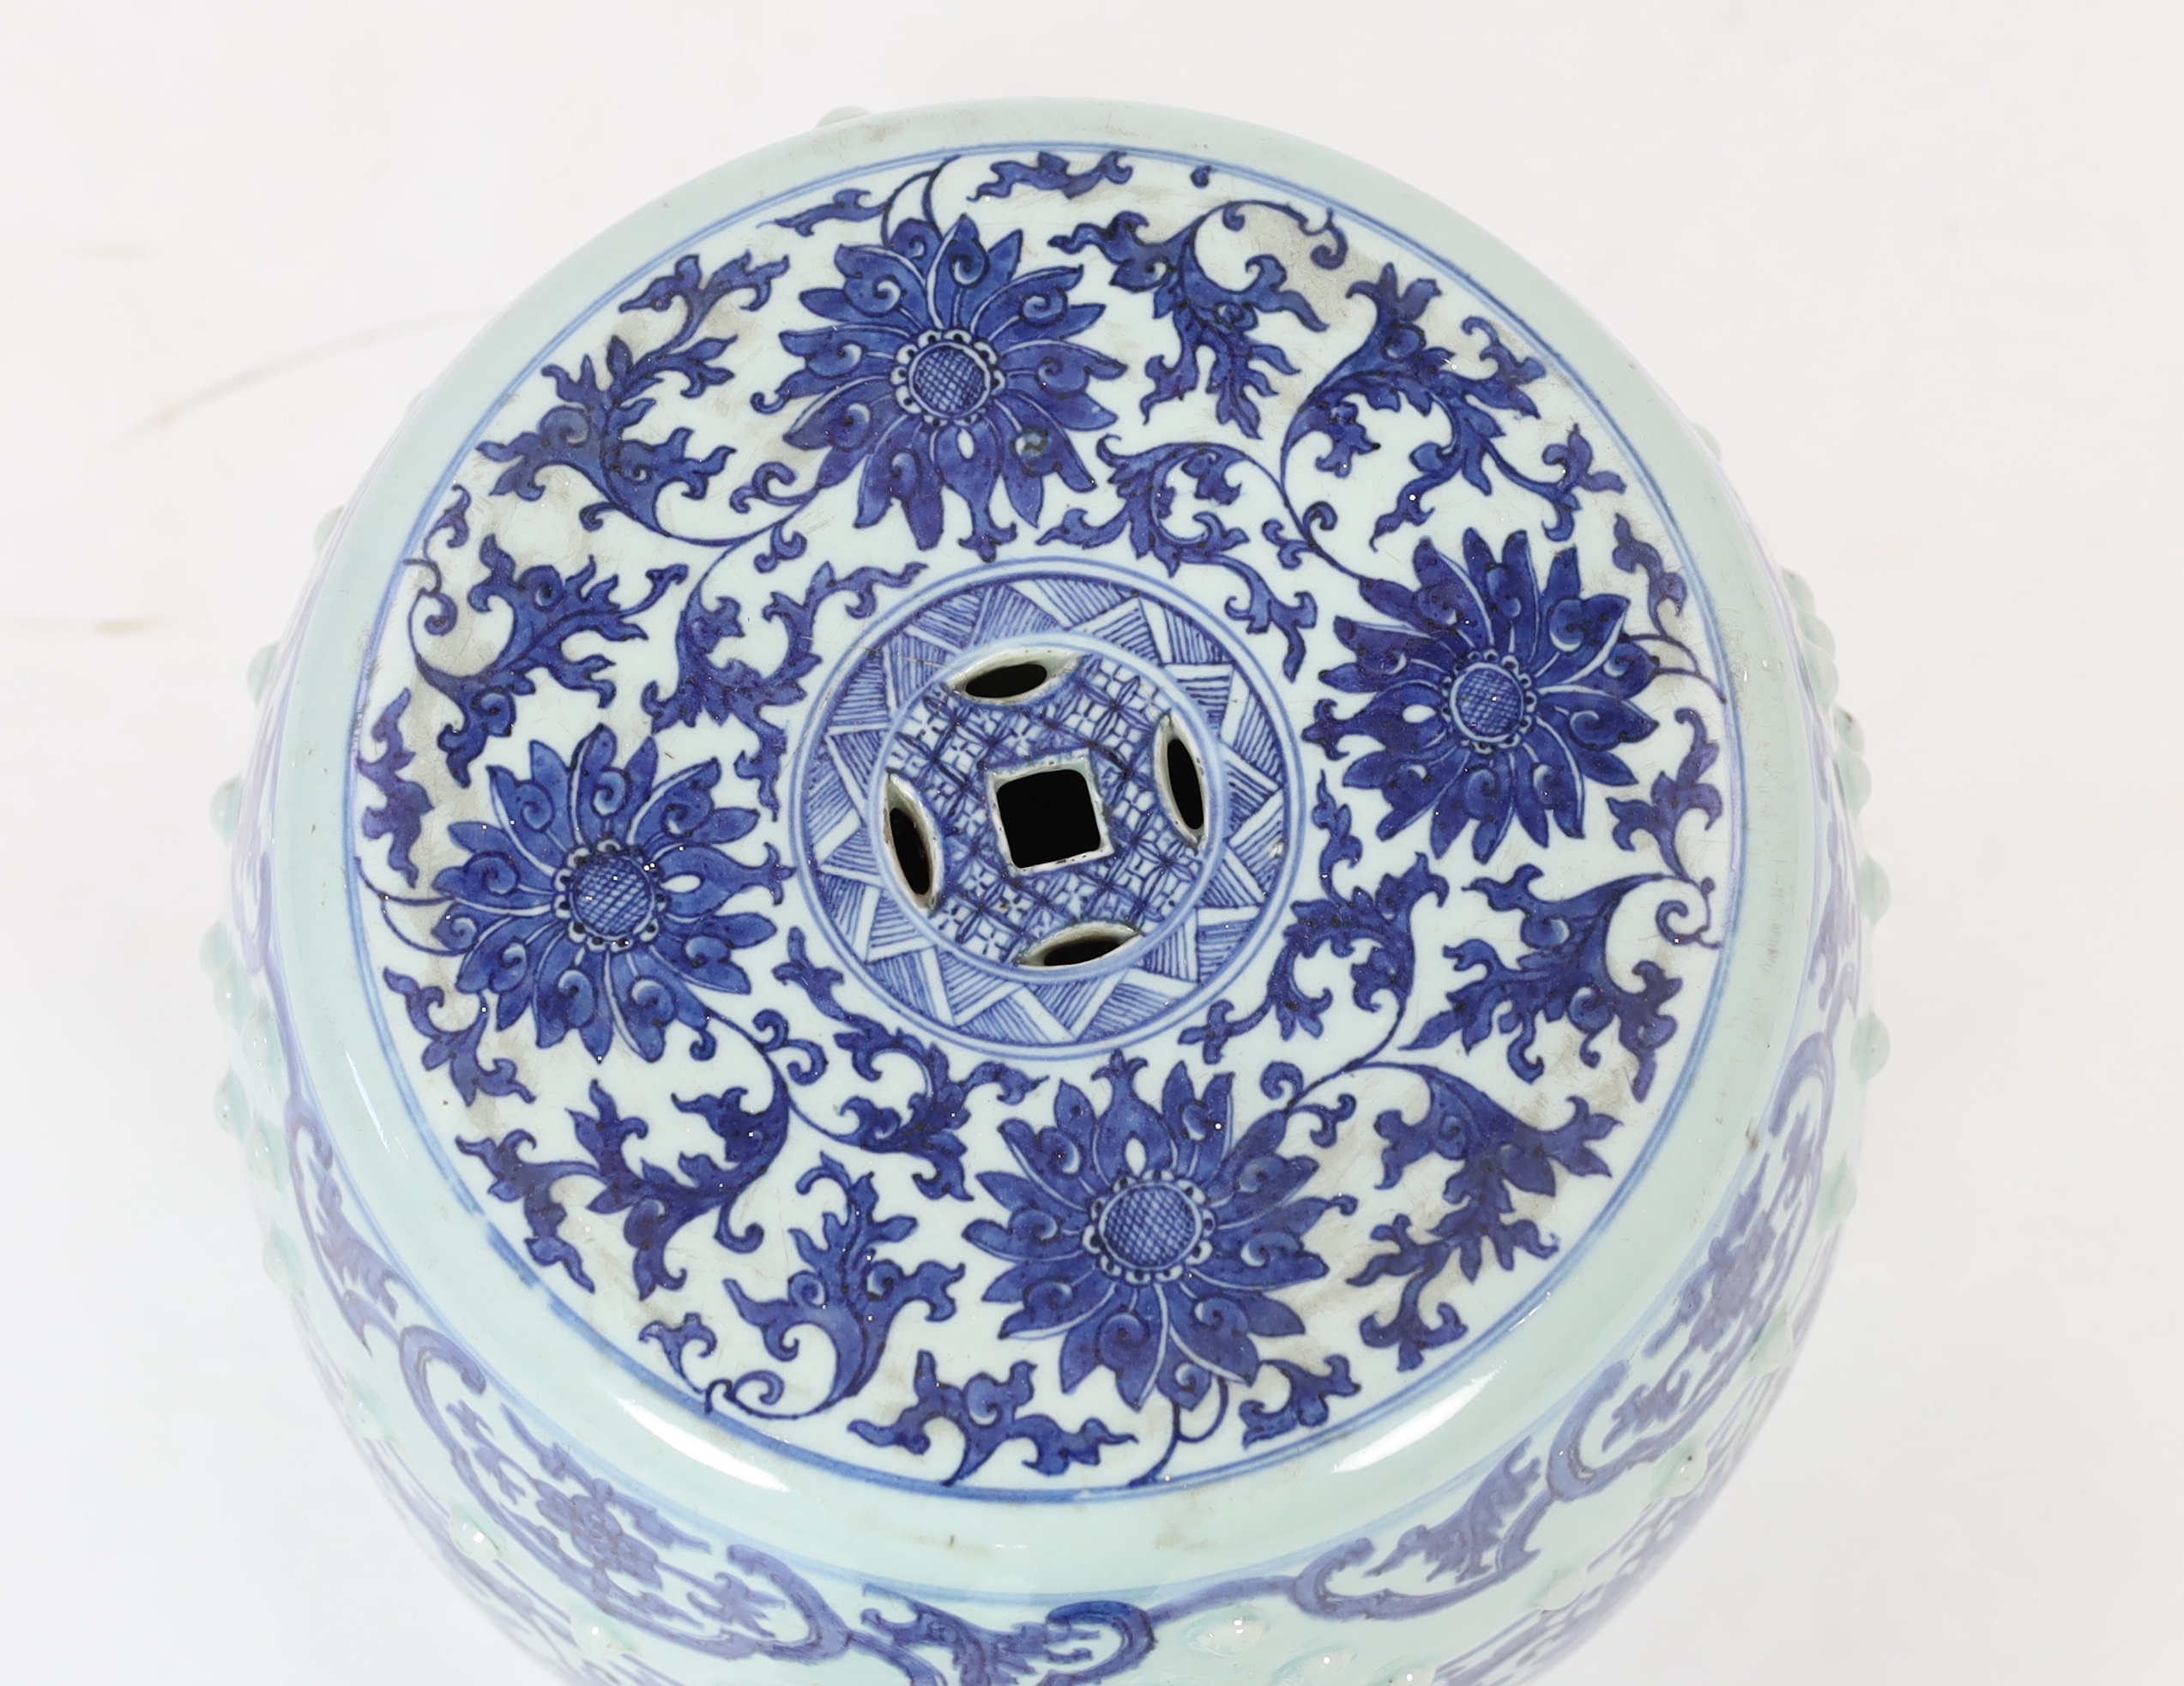 A Chinese blue and white porcelain stool, 19th century, painted with lotus flowers and scrolling - Image 3 of 5